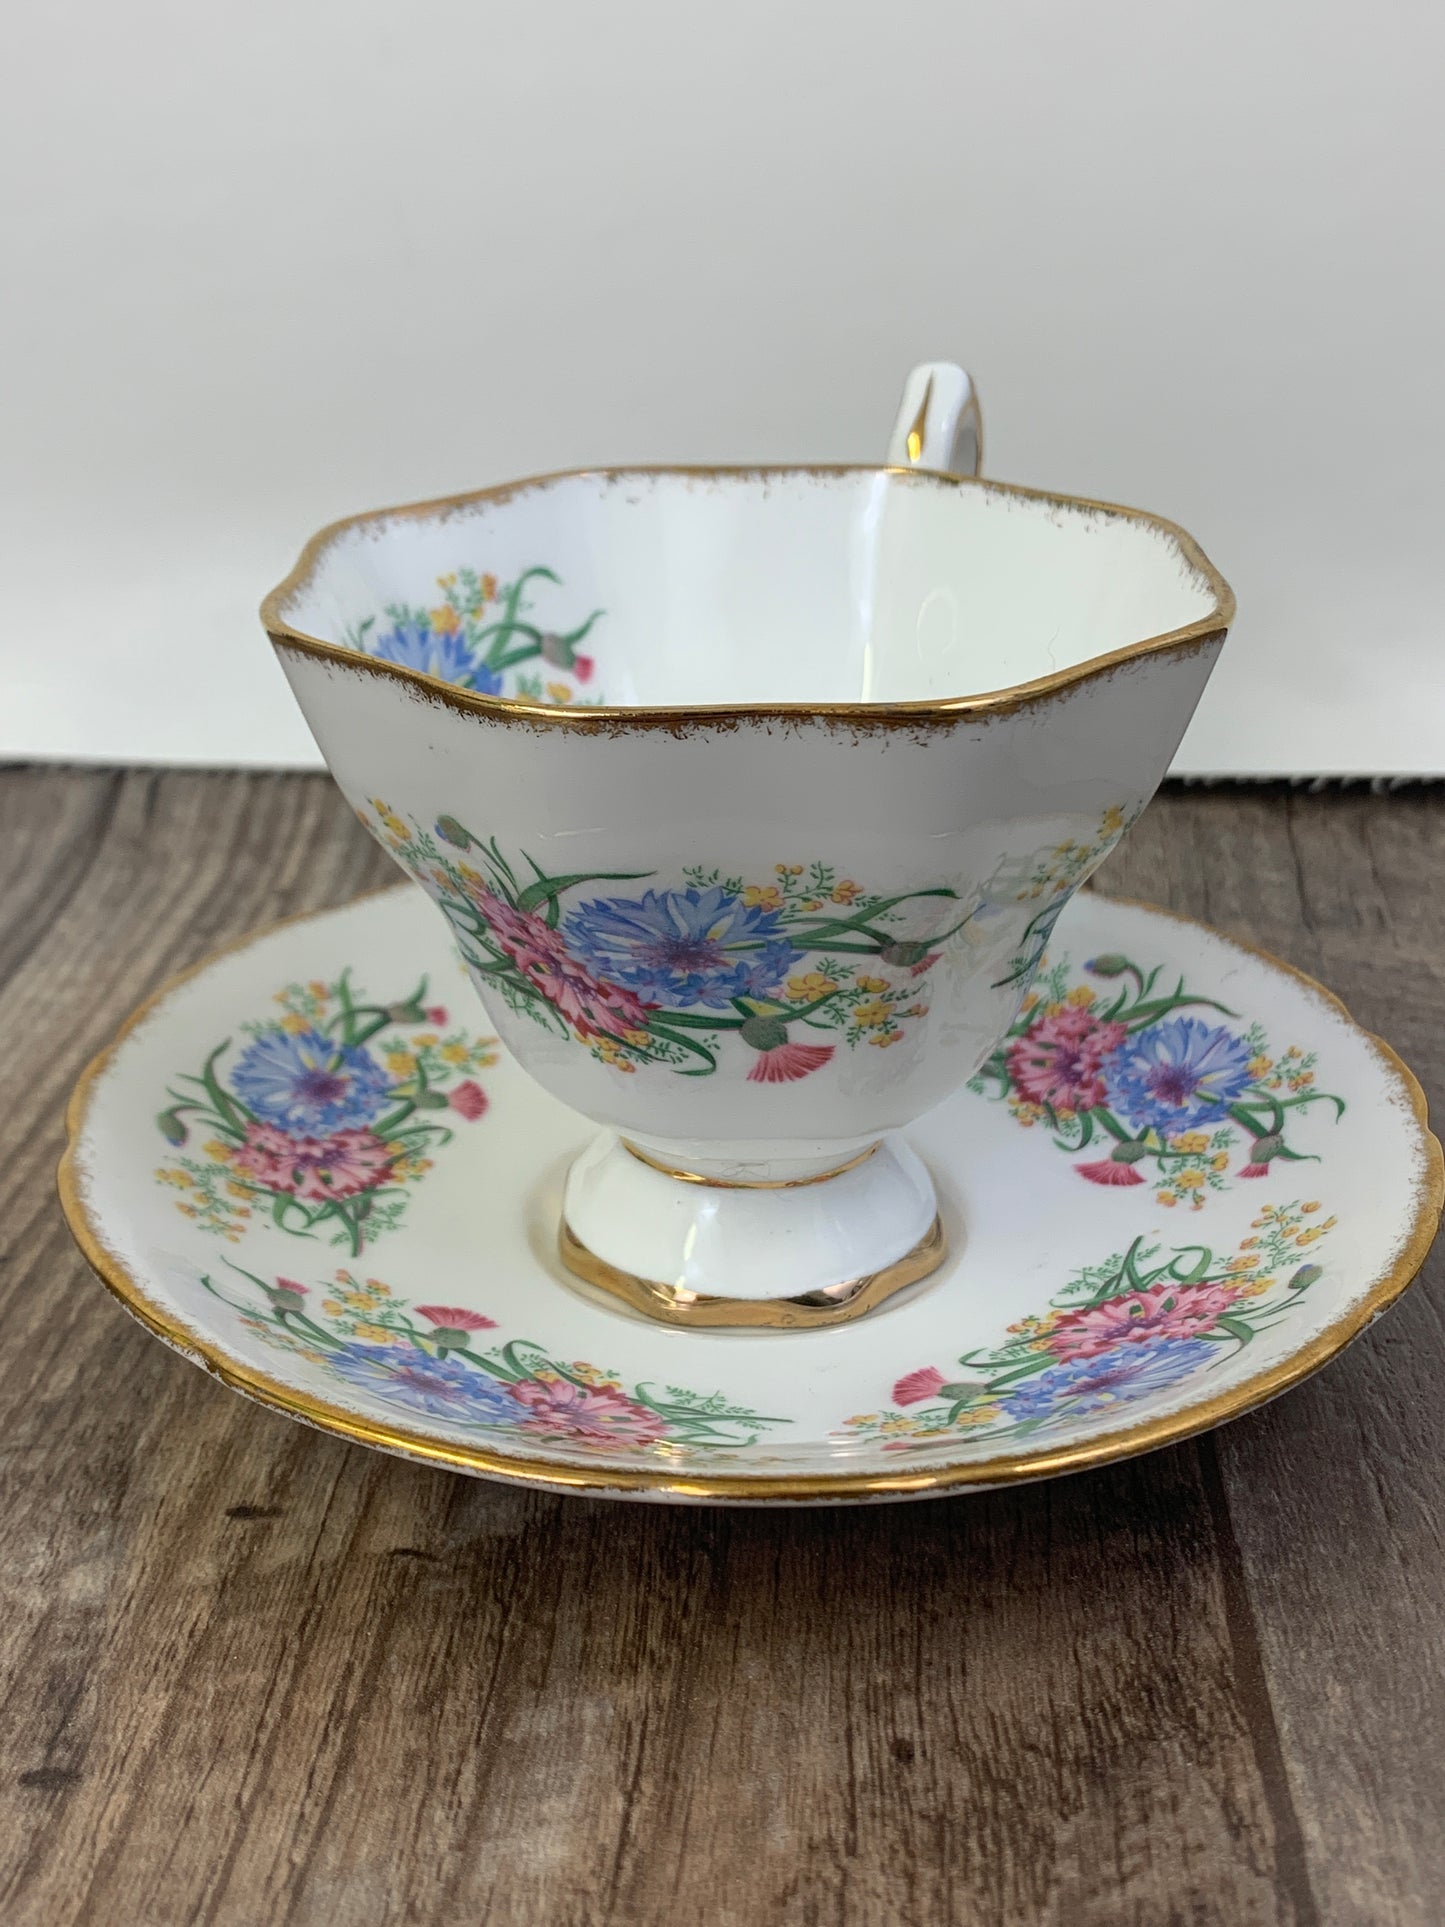 Pink and Blue Thistles Stafford Floral Tea Cup Vintage Teacup with Pink and Blue Floral Pattern